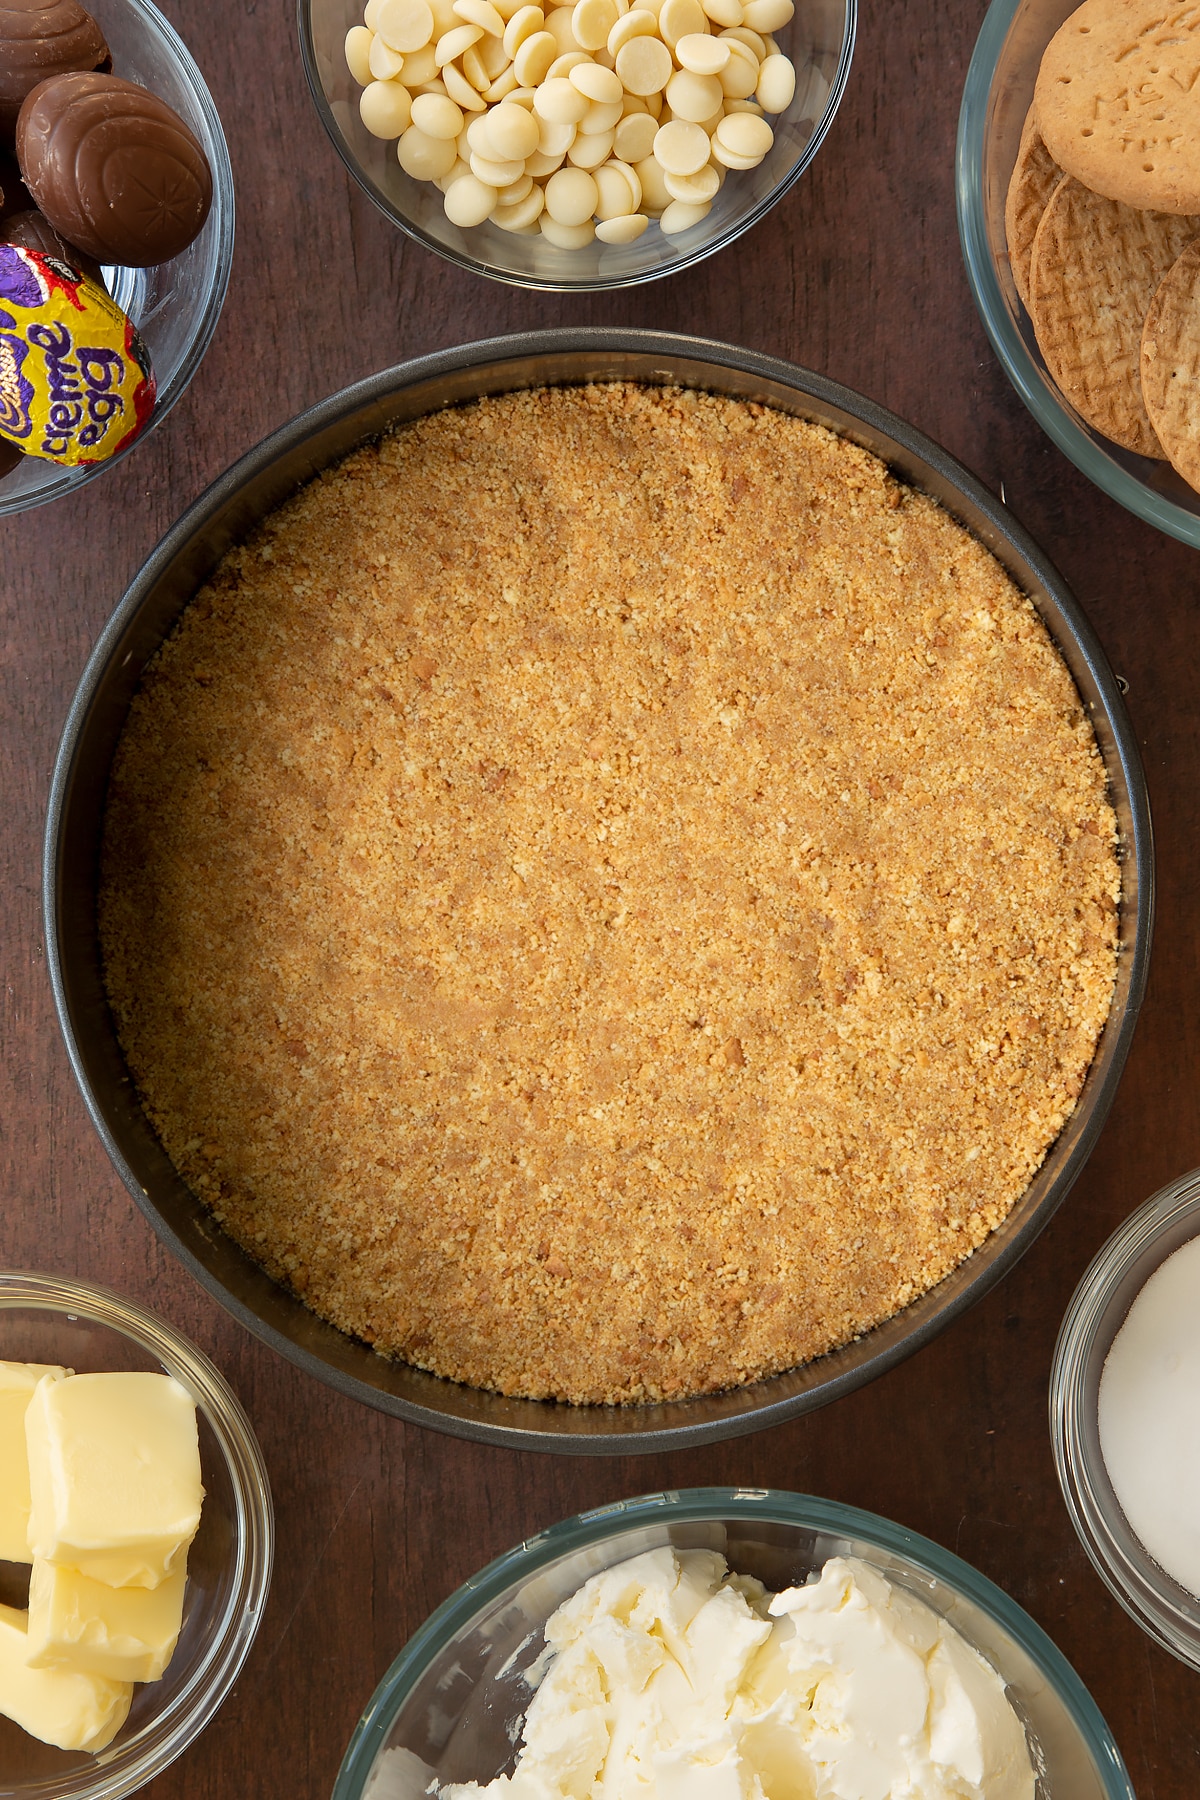 Pushing the biscuit mixture down into the cake tin to form the base of the Cadbury Creme Egg cheesecake.